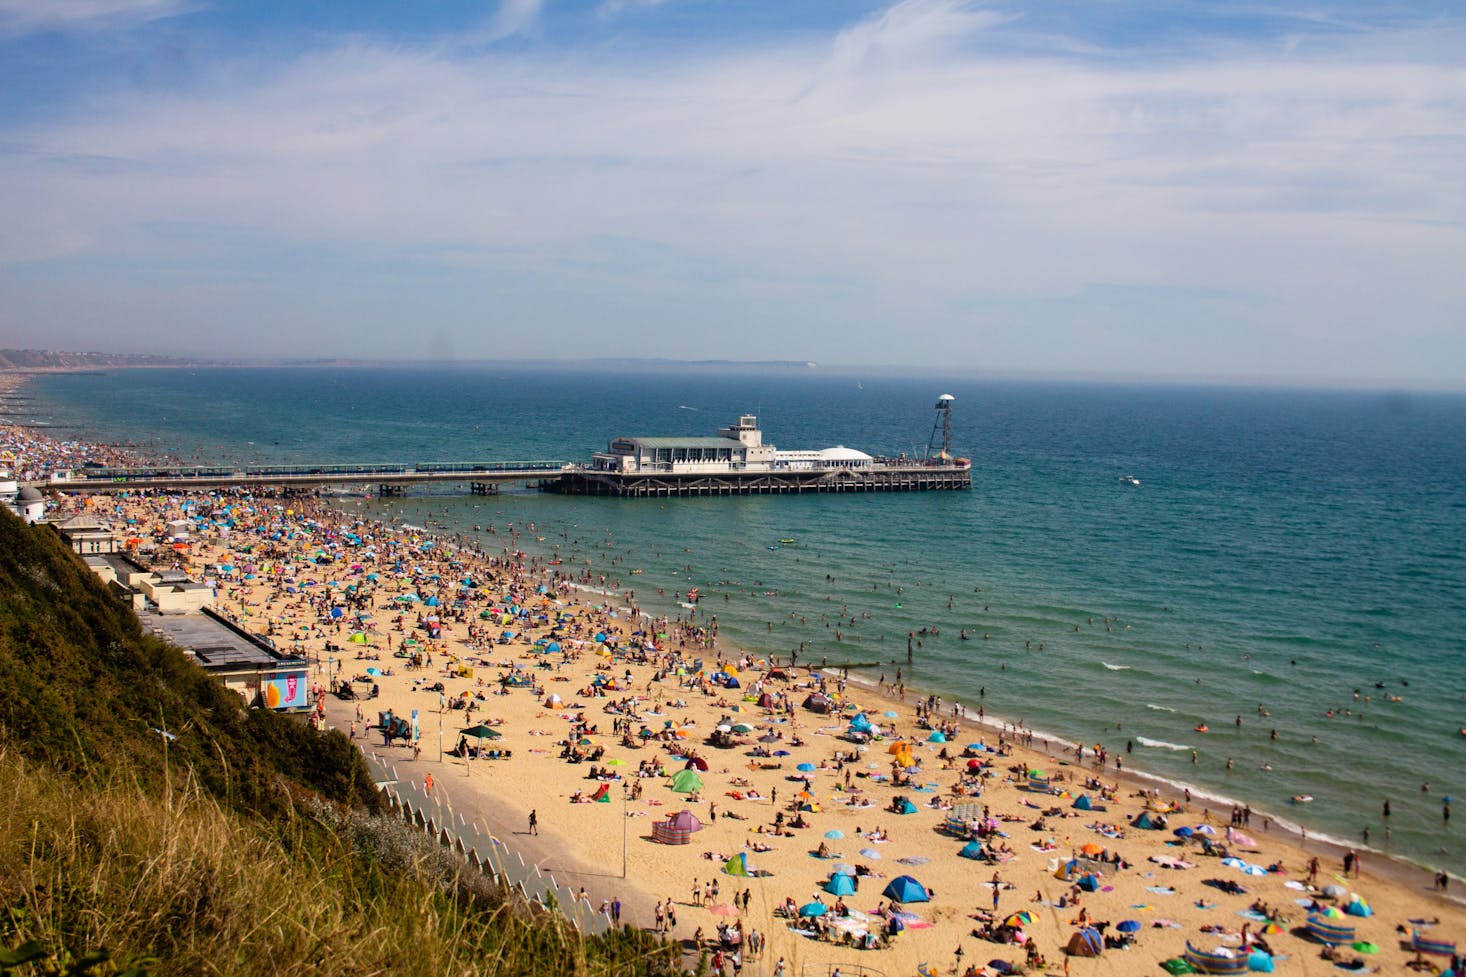 Day trips to Bournemouth Beach from London